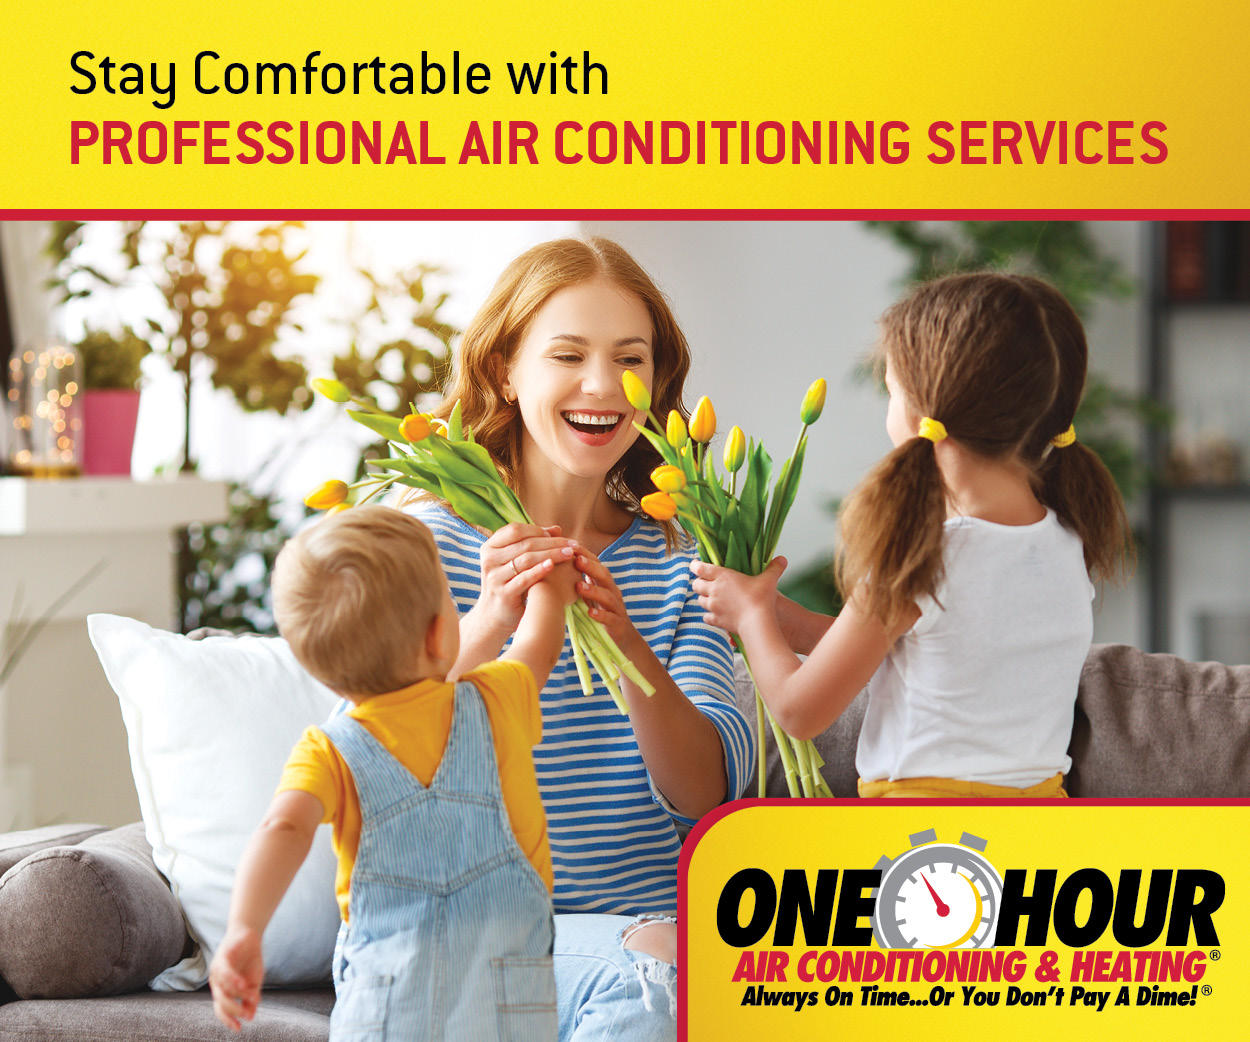 One Hour Air Conditioning & Heating Photo